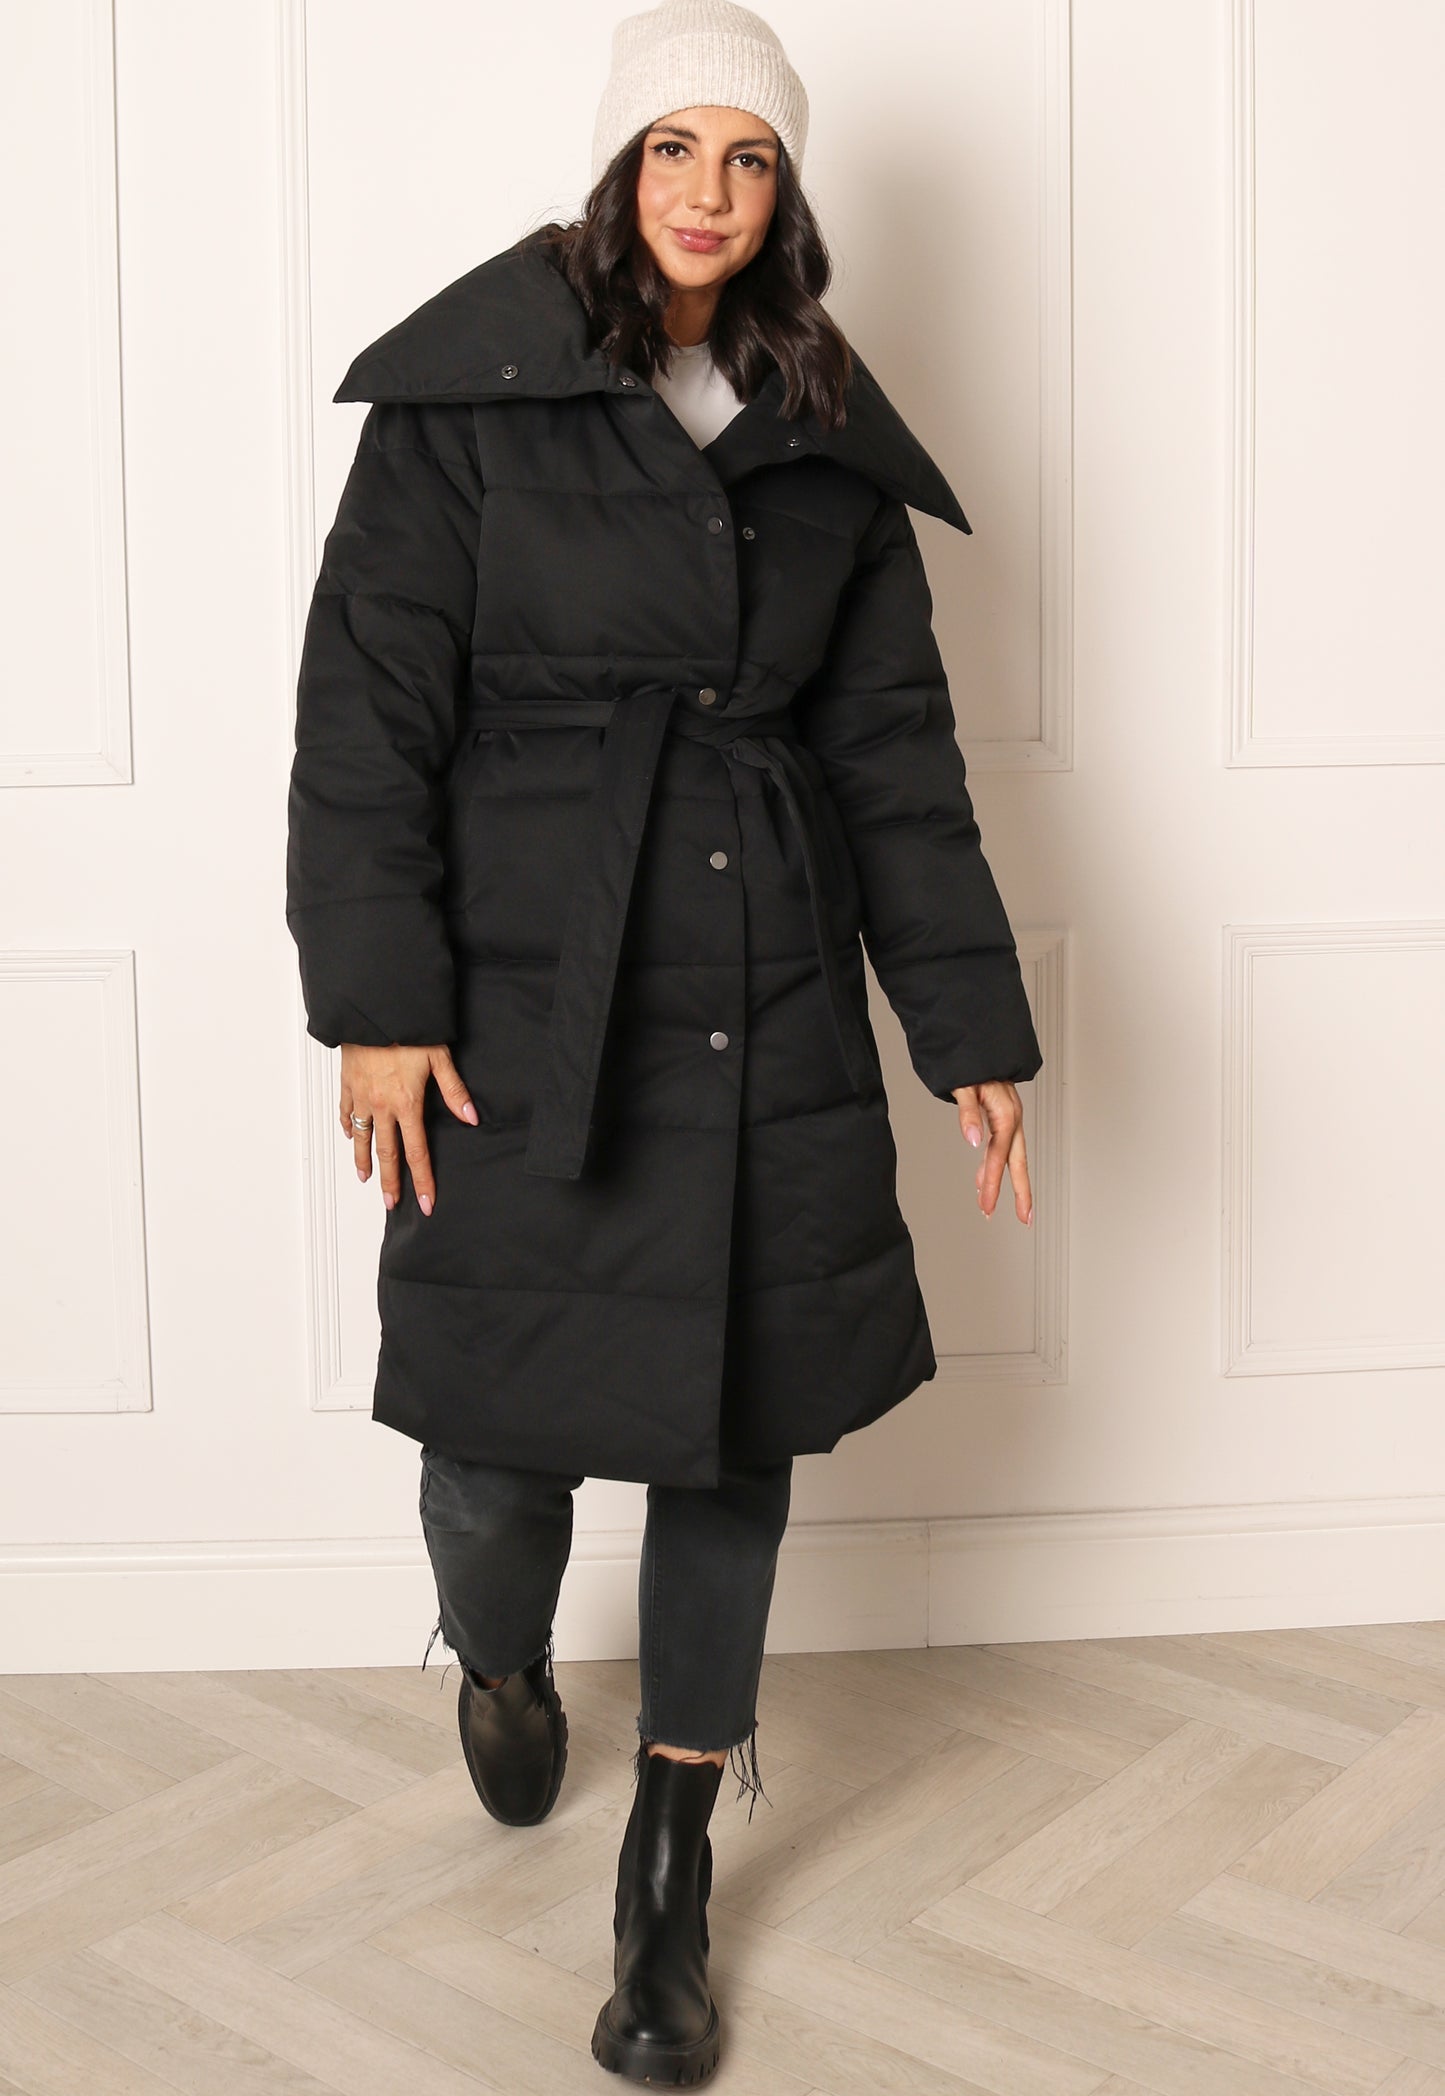 VILA Sulitana Midi Longline Belted Puffer Coat with Shawl Collar in Black - One Nation Clothing